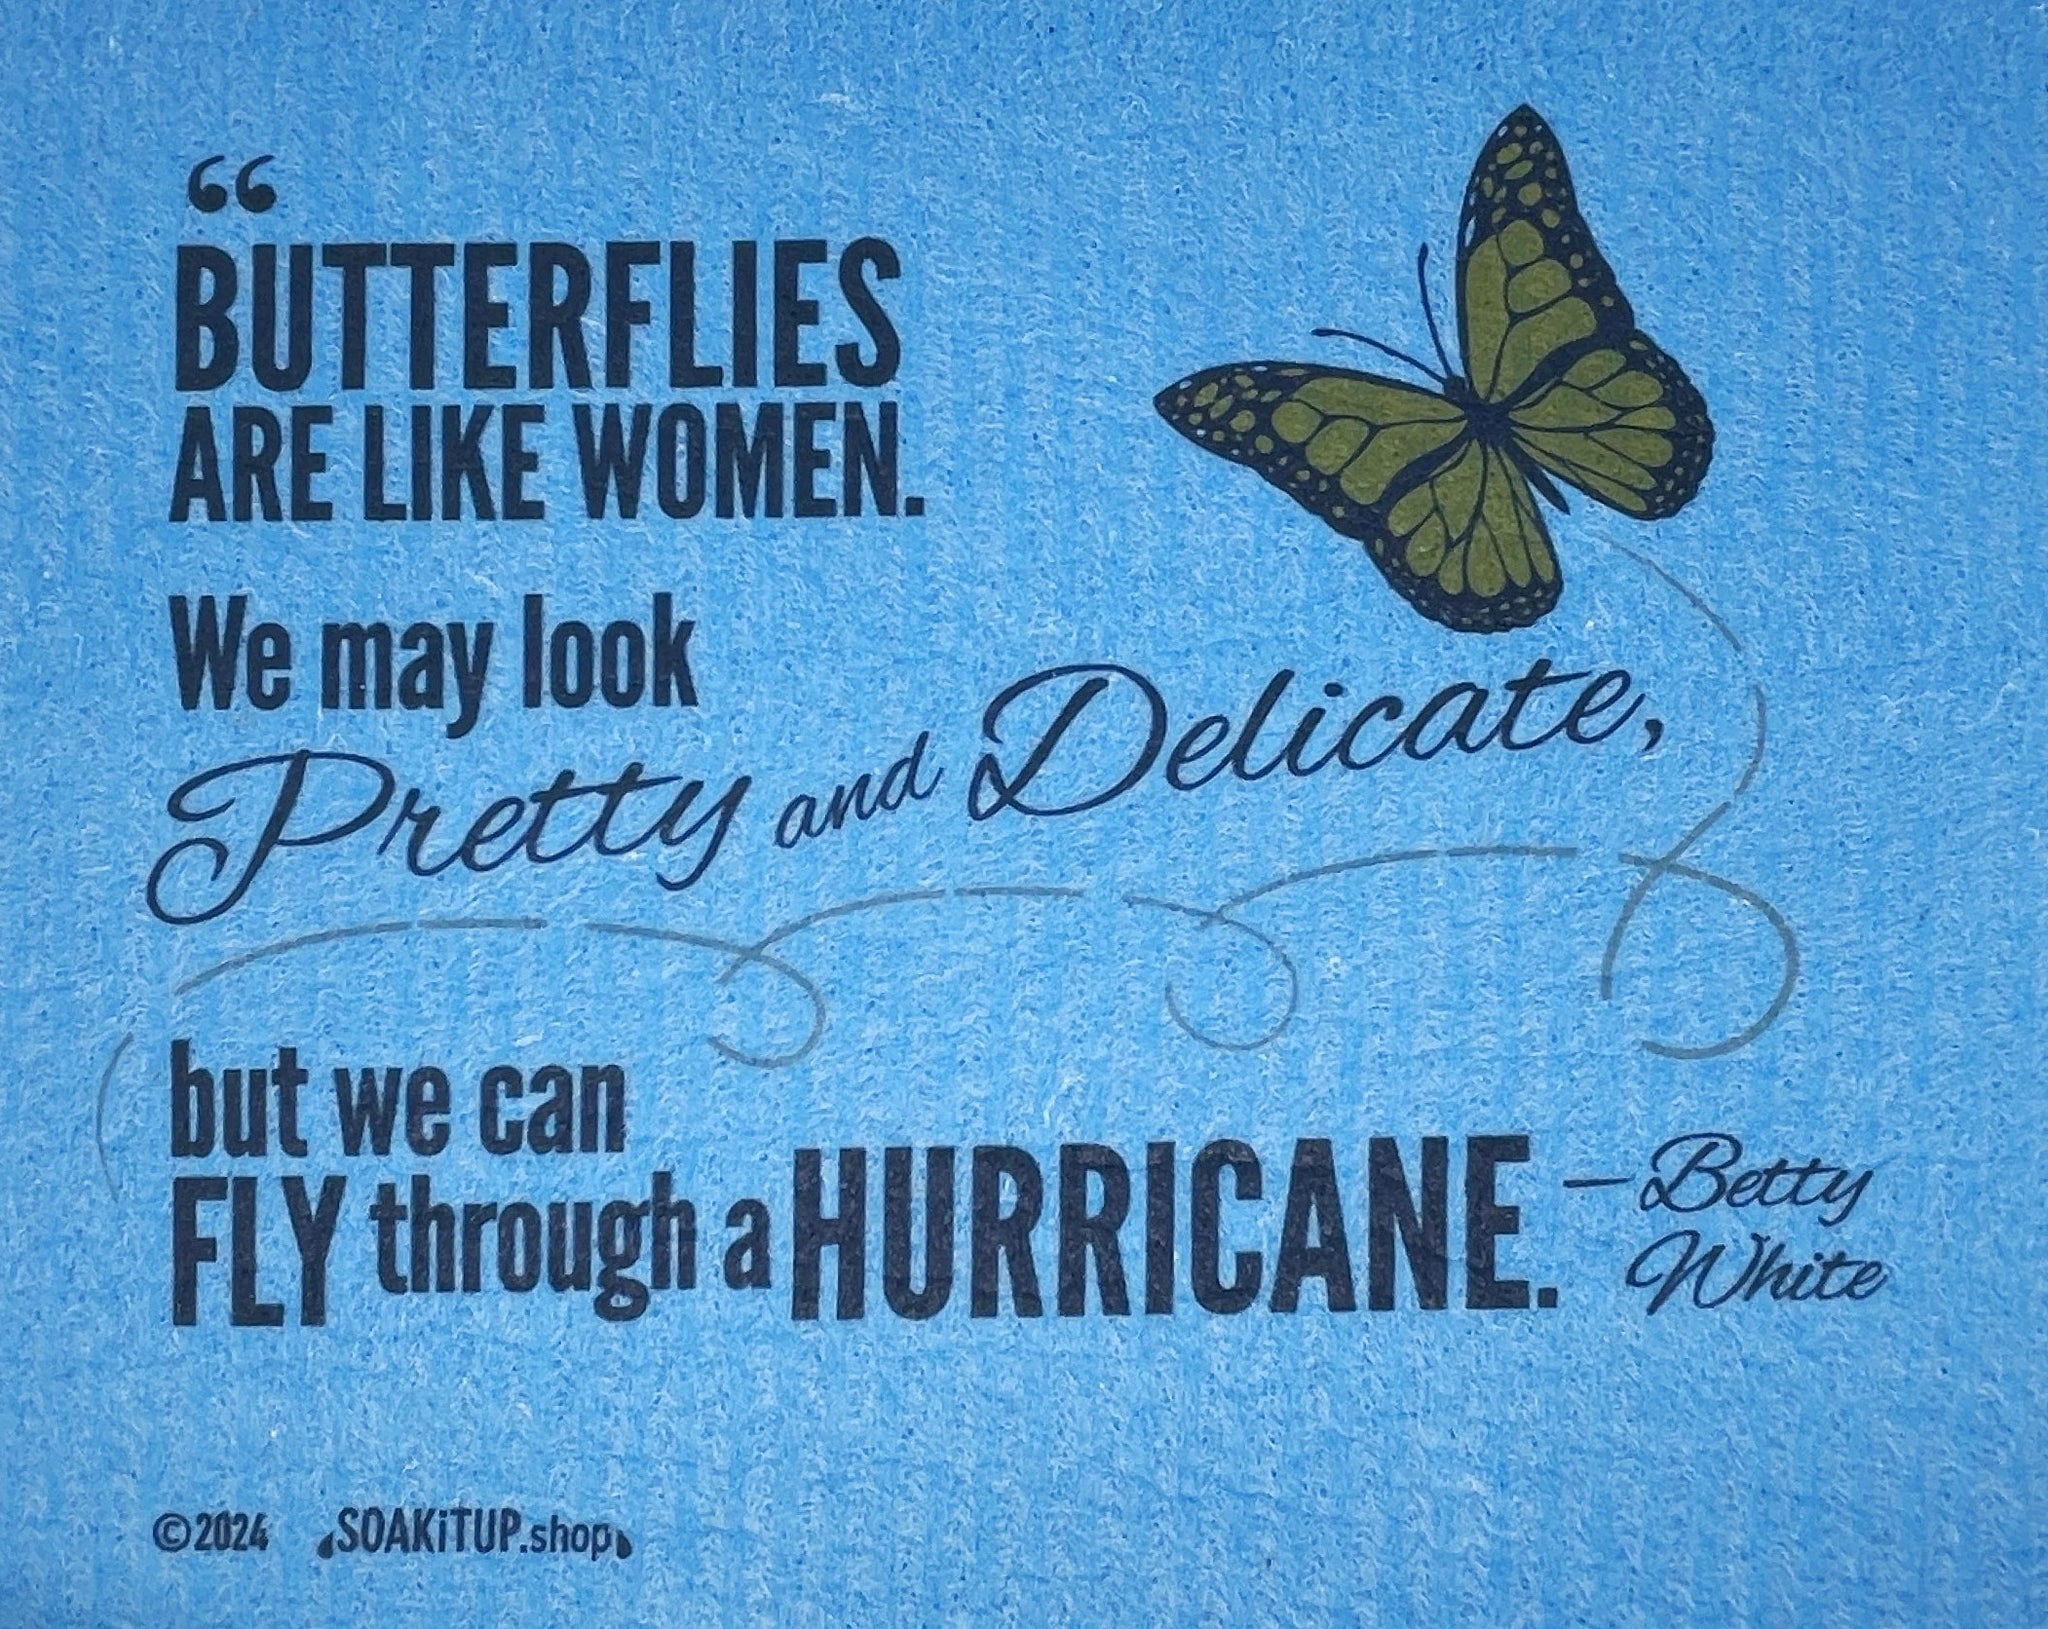 ’Butterflies are like women. We may look pretty and